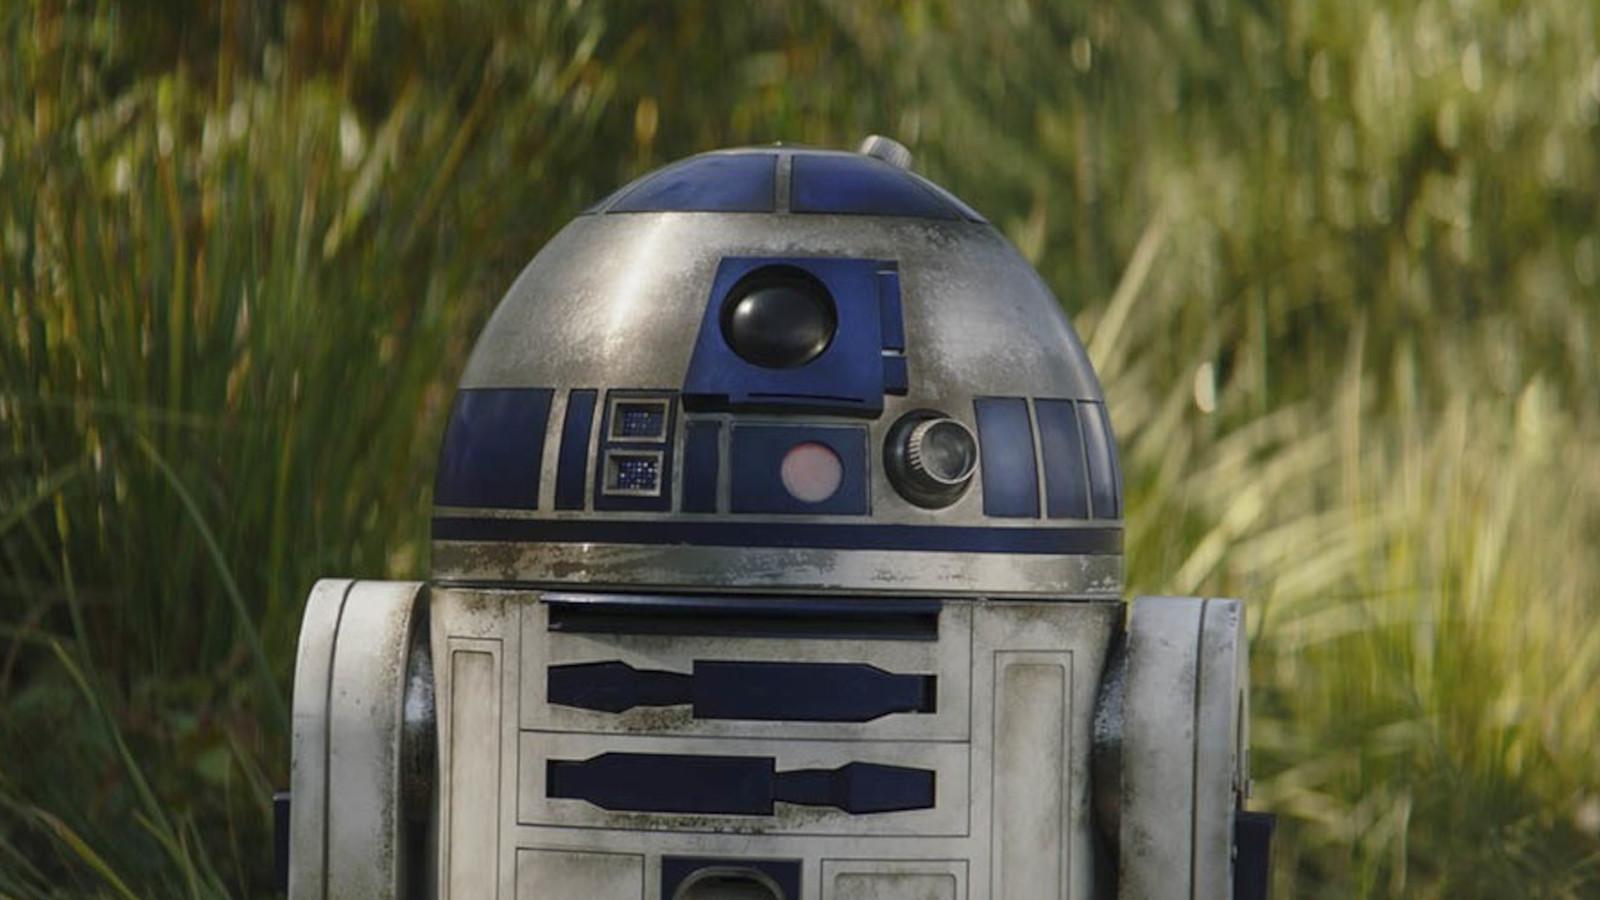 R2-D2 in The Force Awakens.